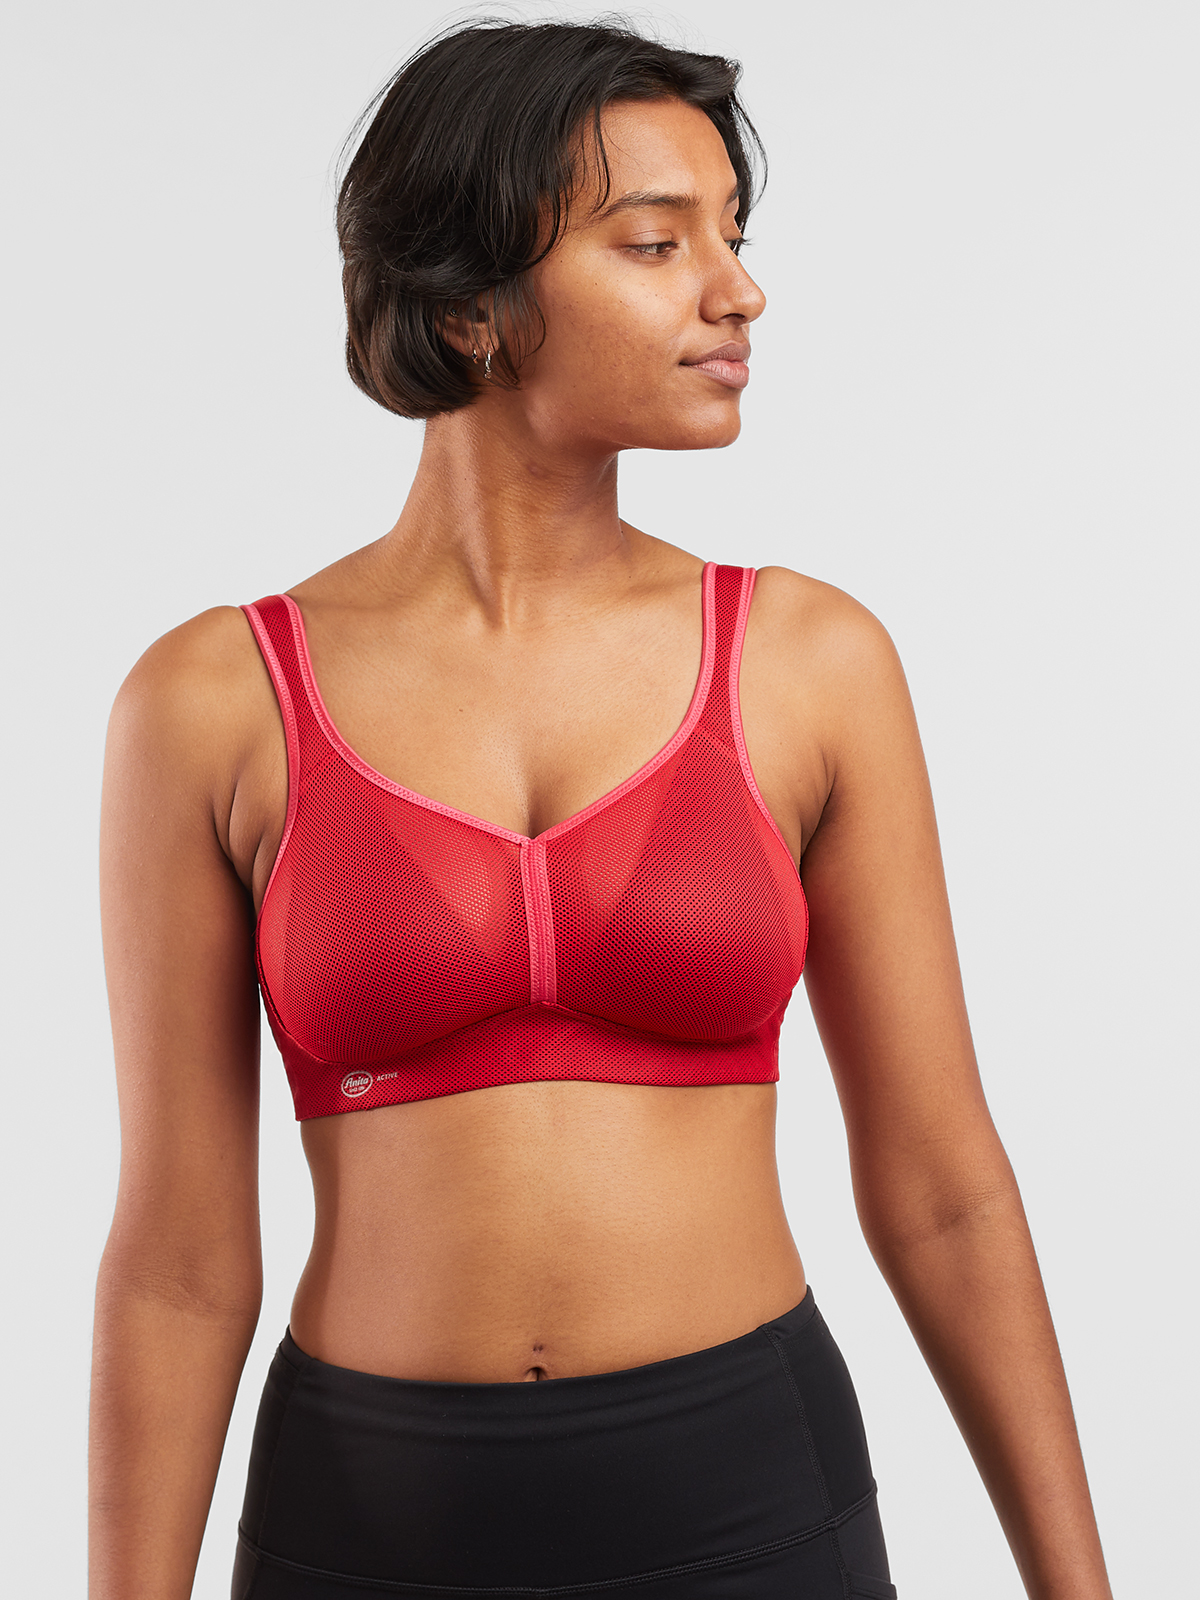 Womens Cooling Air Filtered Sports Bra Sizes Small Through 4X